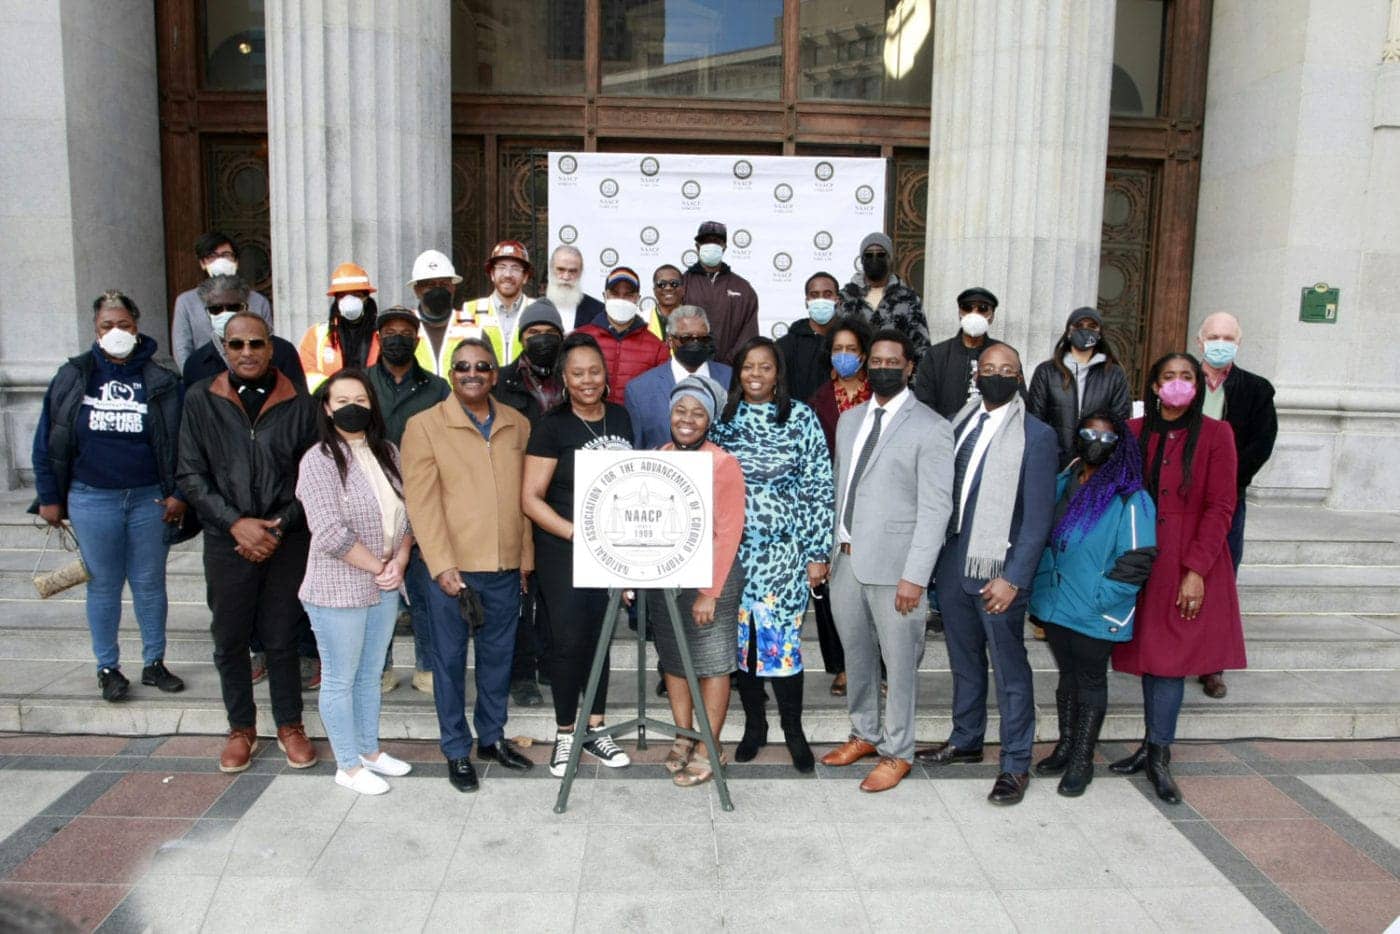 NAACP-press-conference-demanding-inclusion-of-Black-contractors-workers-in-Oakland-paving-contracts-011822-by-Auintard-Henderson-1400x934, Black leaders demand inclusion of Black contractors on $60 million in Oakland paving contracts, News & Views 